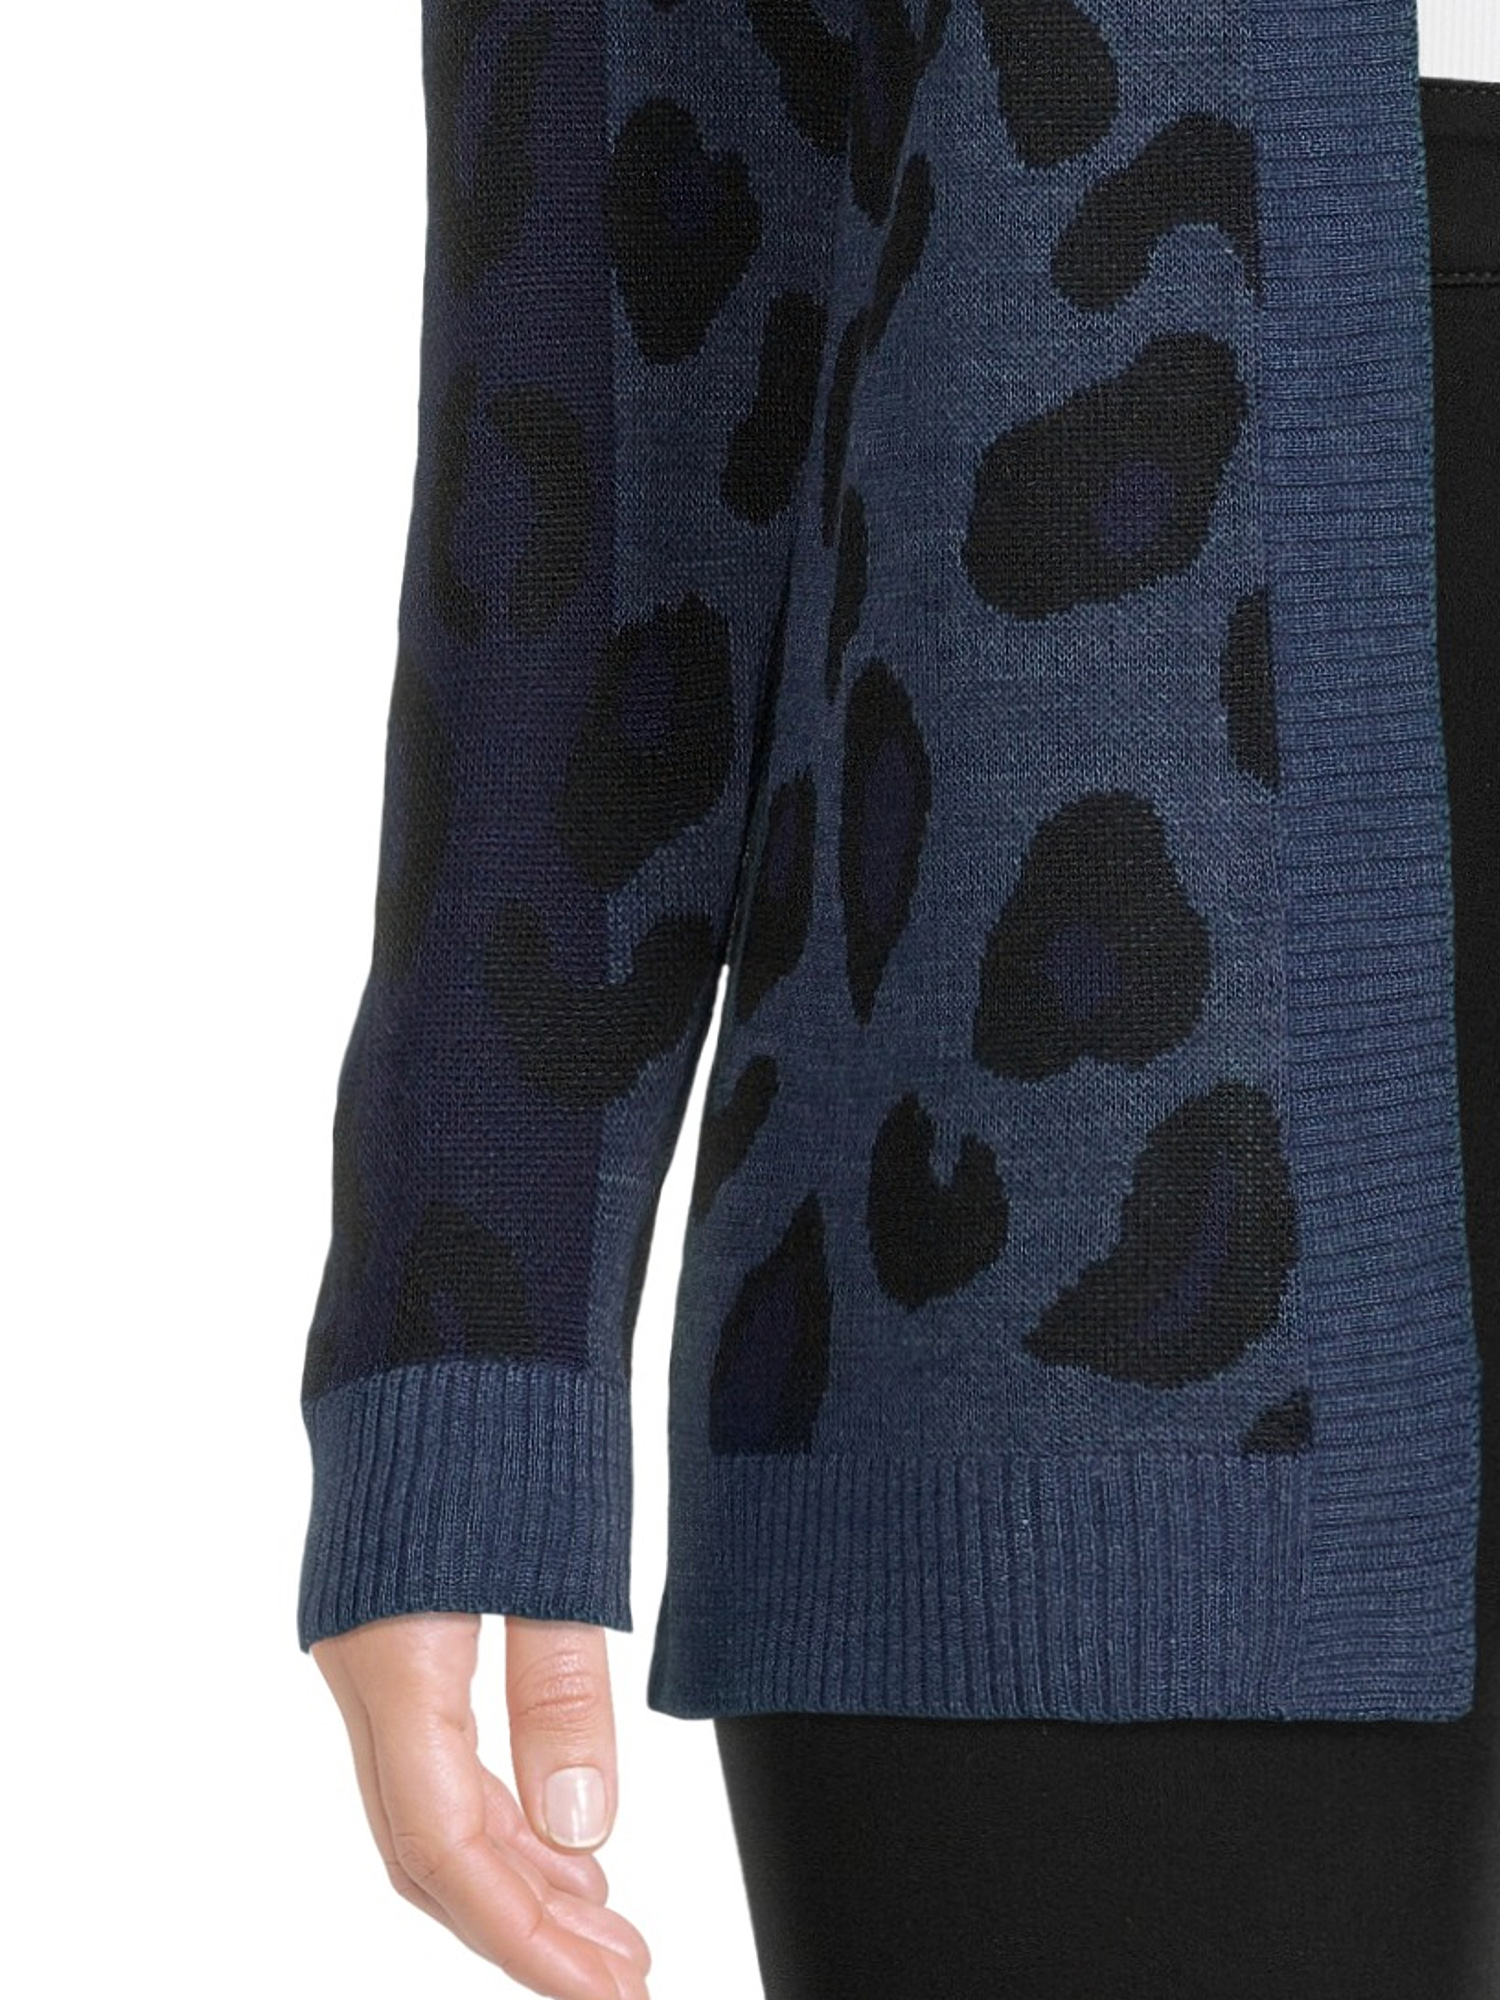 Time and Tru Women's Open Front Animal Cardigan - image 5 of 5